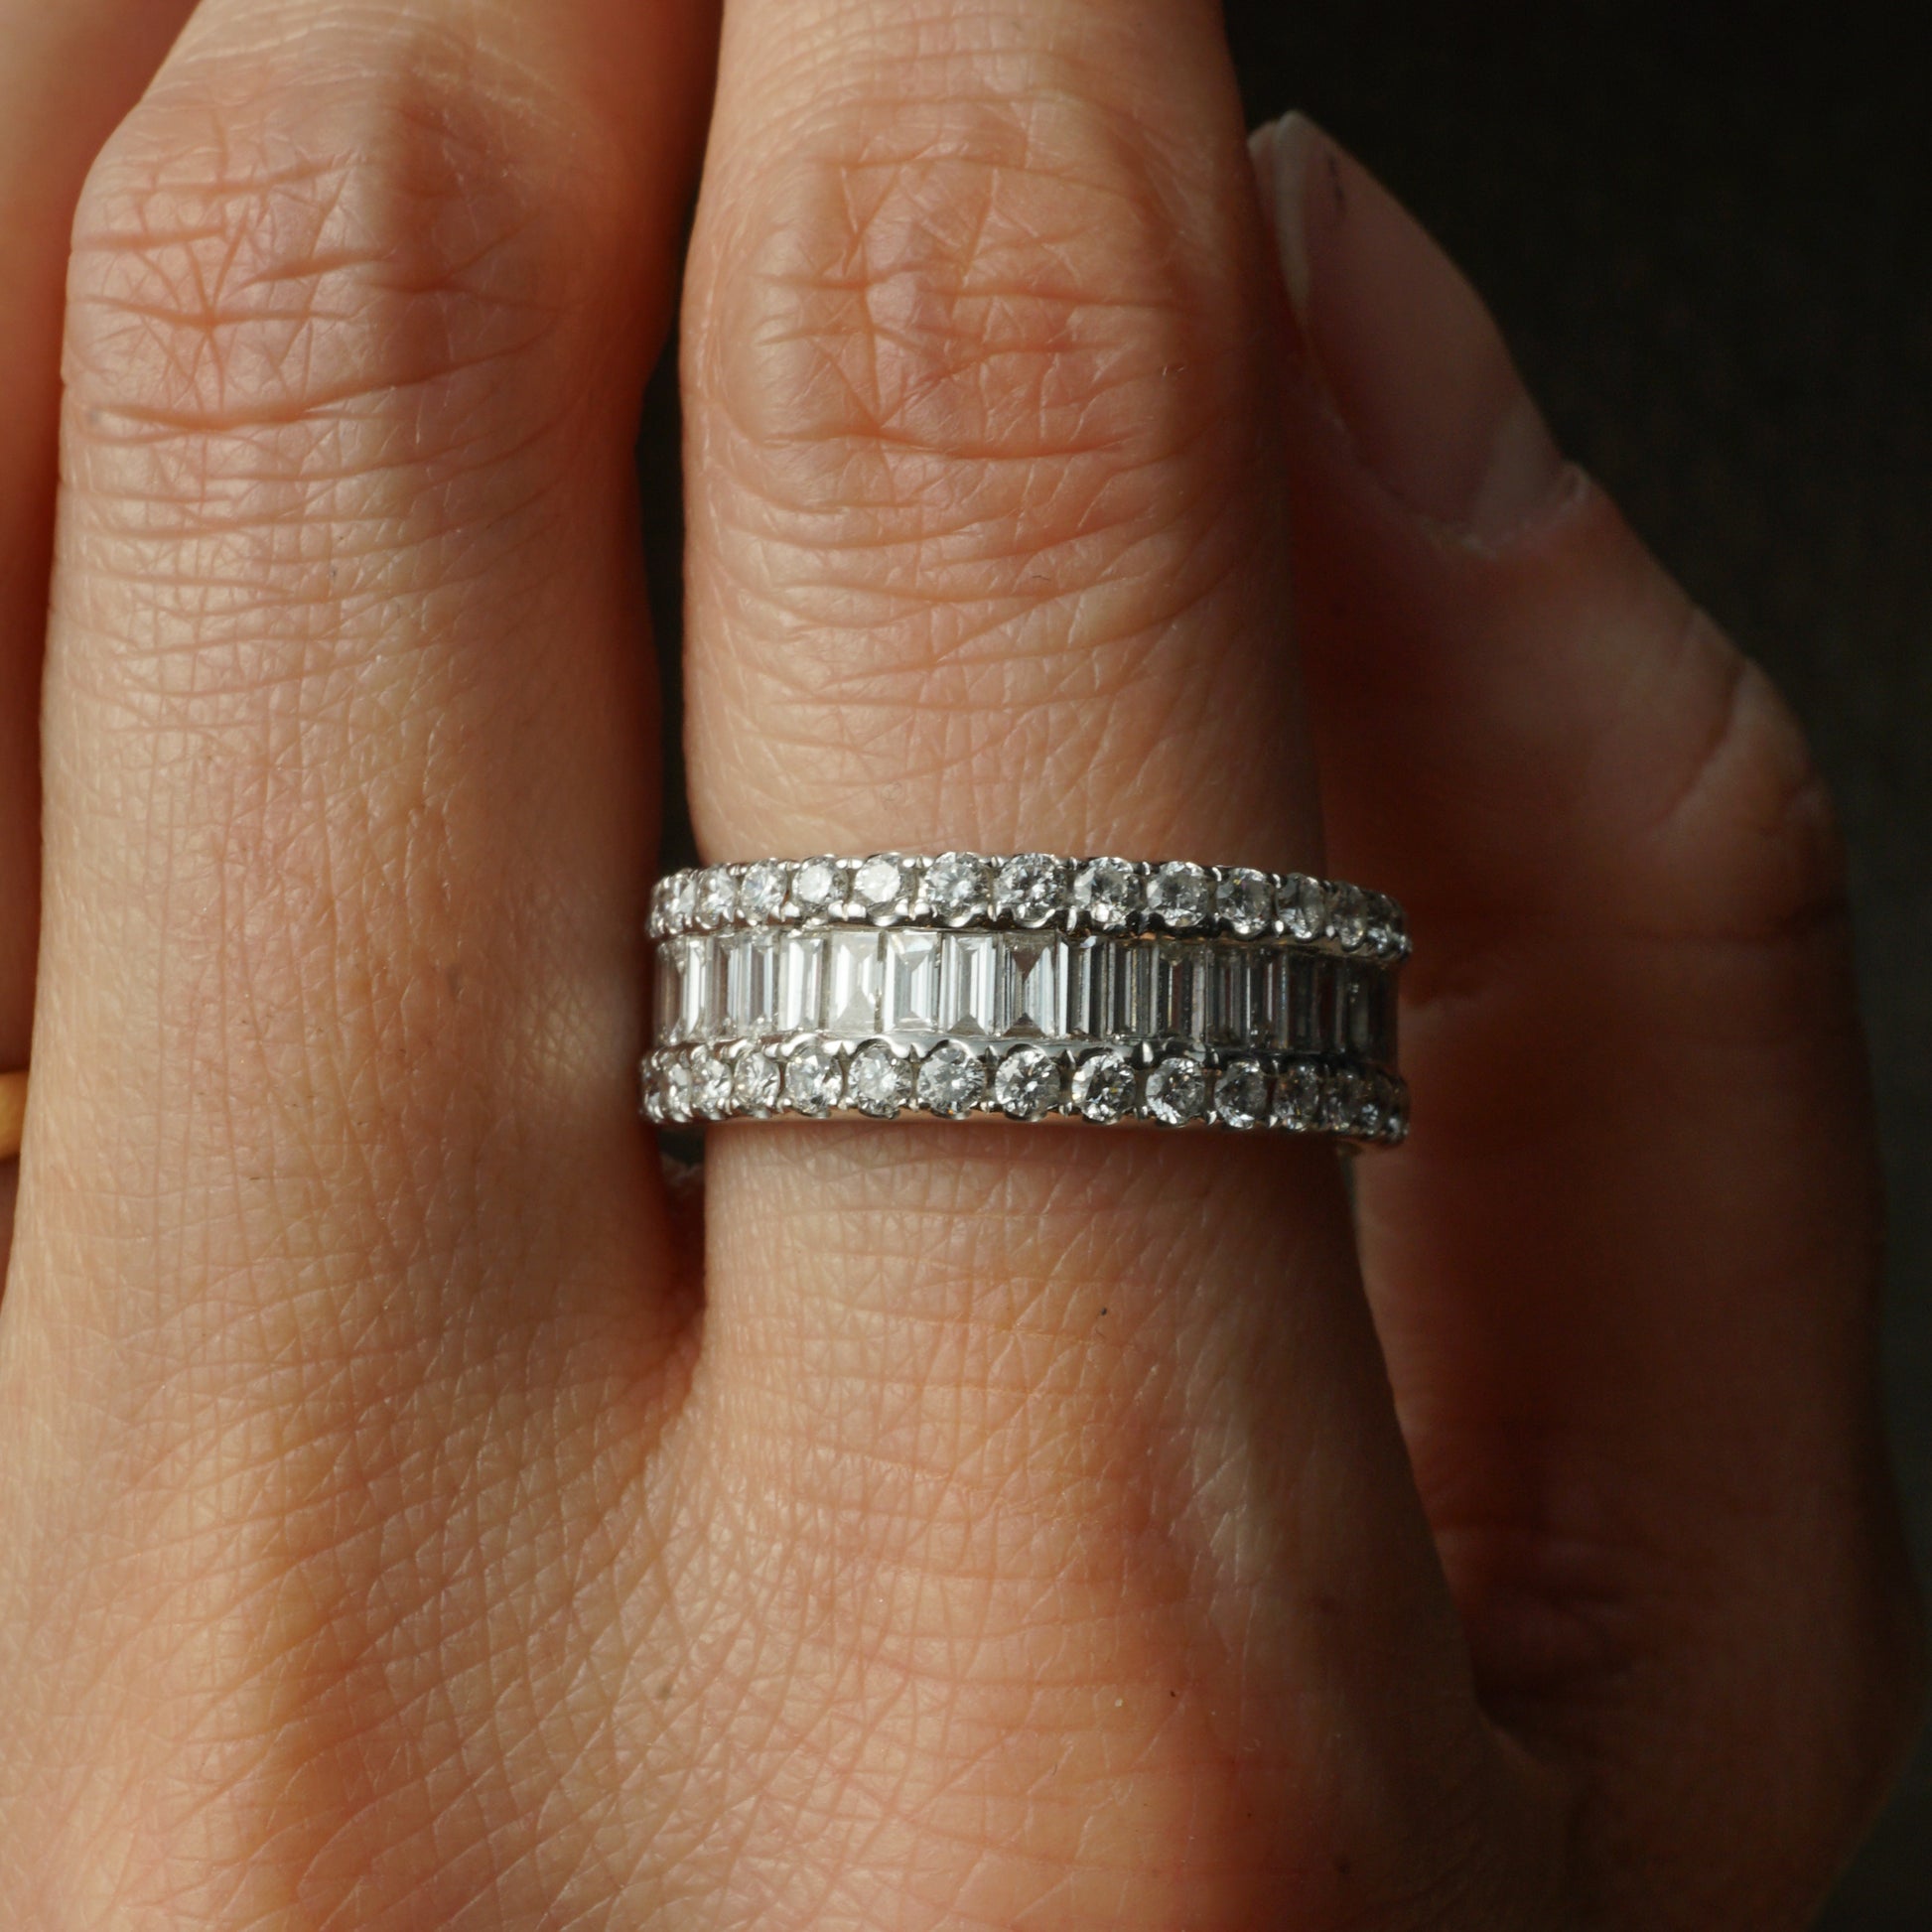 2.65 Baguette & Round Cut Diamond Eternity Band in 18k White GoldComposition: Platinum Ring Size: 6.5 Total Diamond Weight: 2.65ct Total Gram Weight: 4.7 g Inscription: 18K 750 D2.65
      